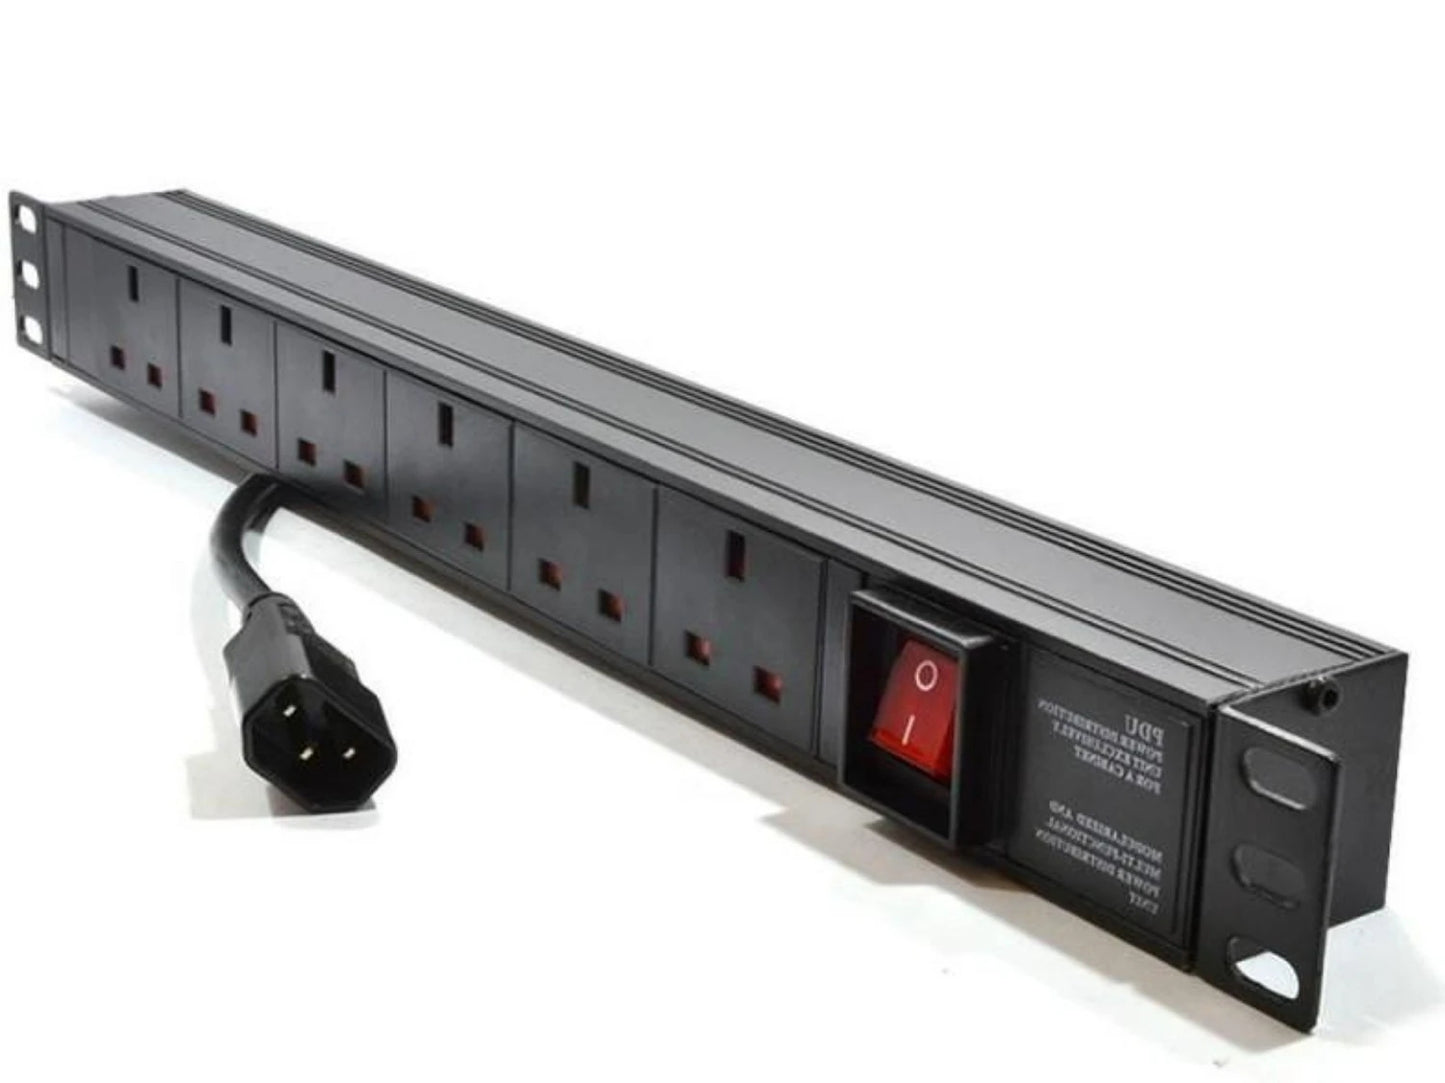 6-Way Outlet Surge Protector